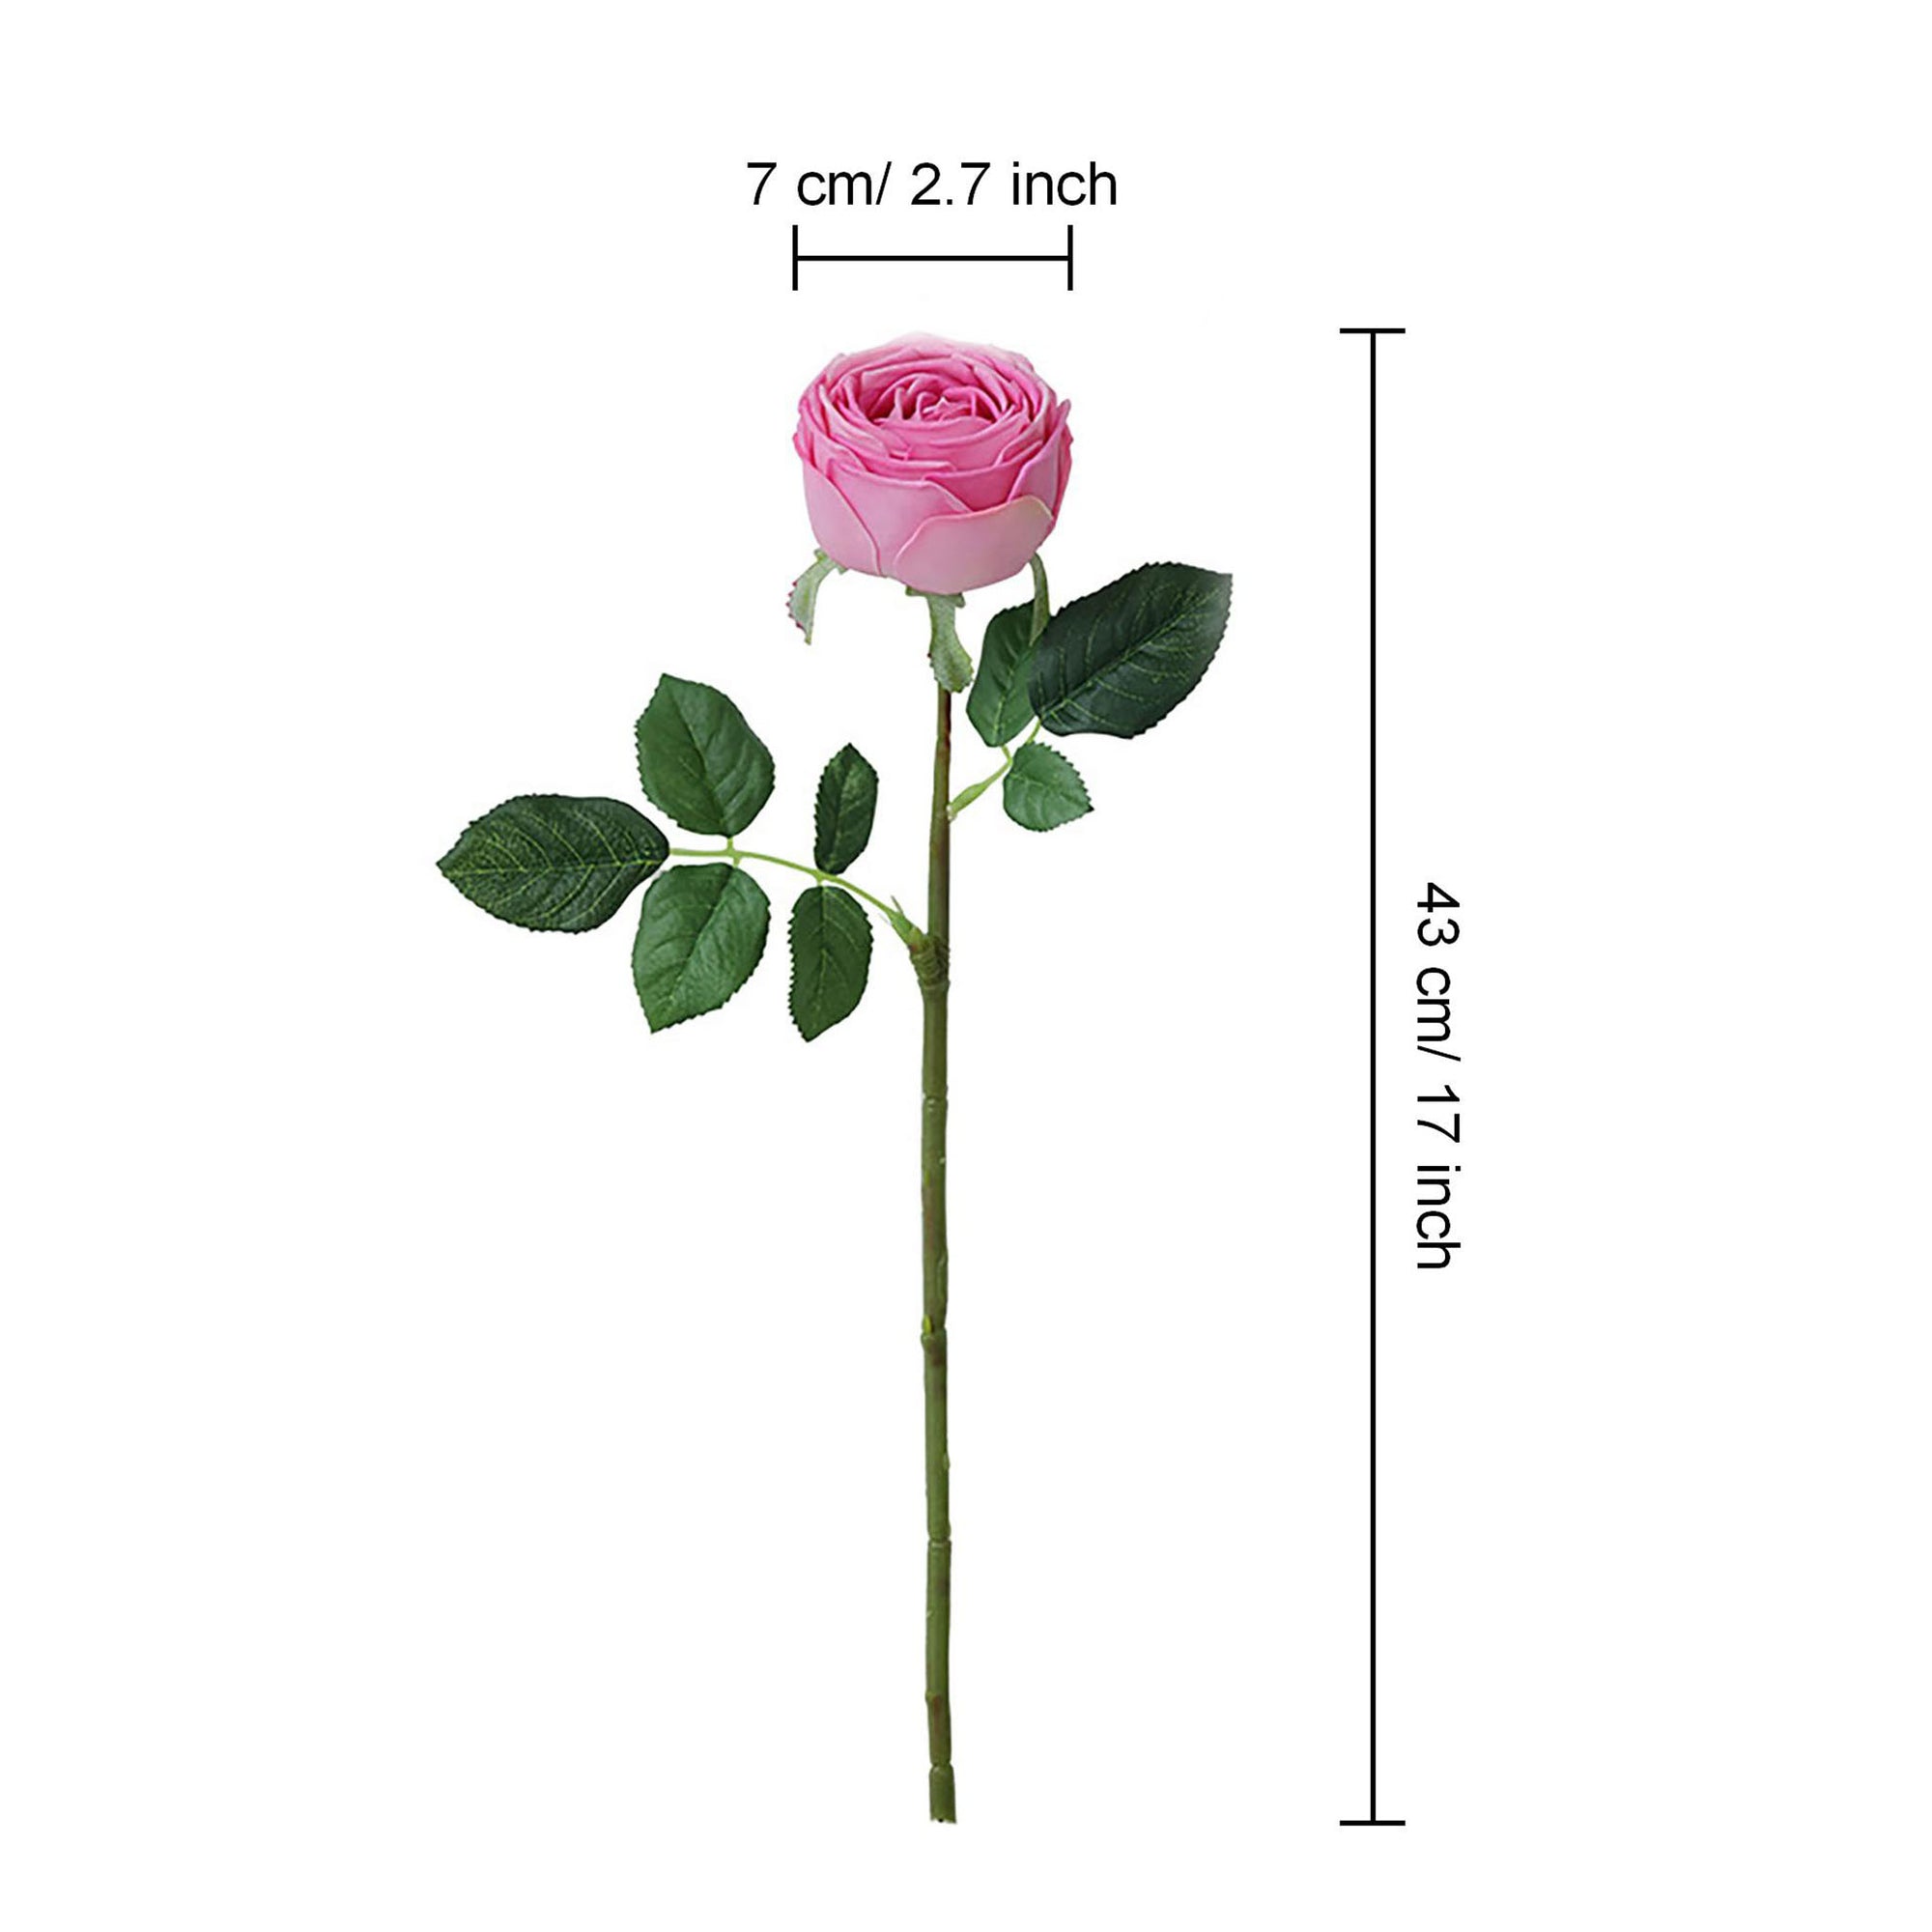 Realistic Artificial English Cabbage Rose 17 inch Tall